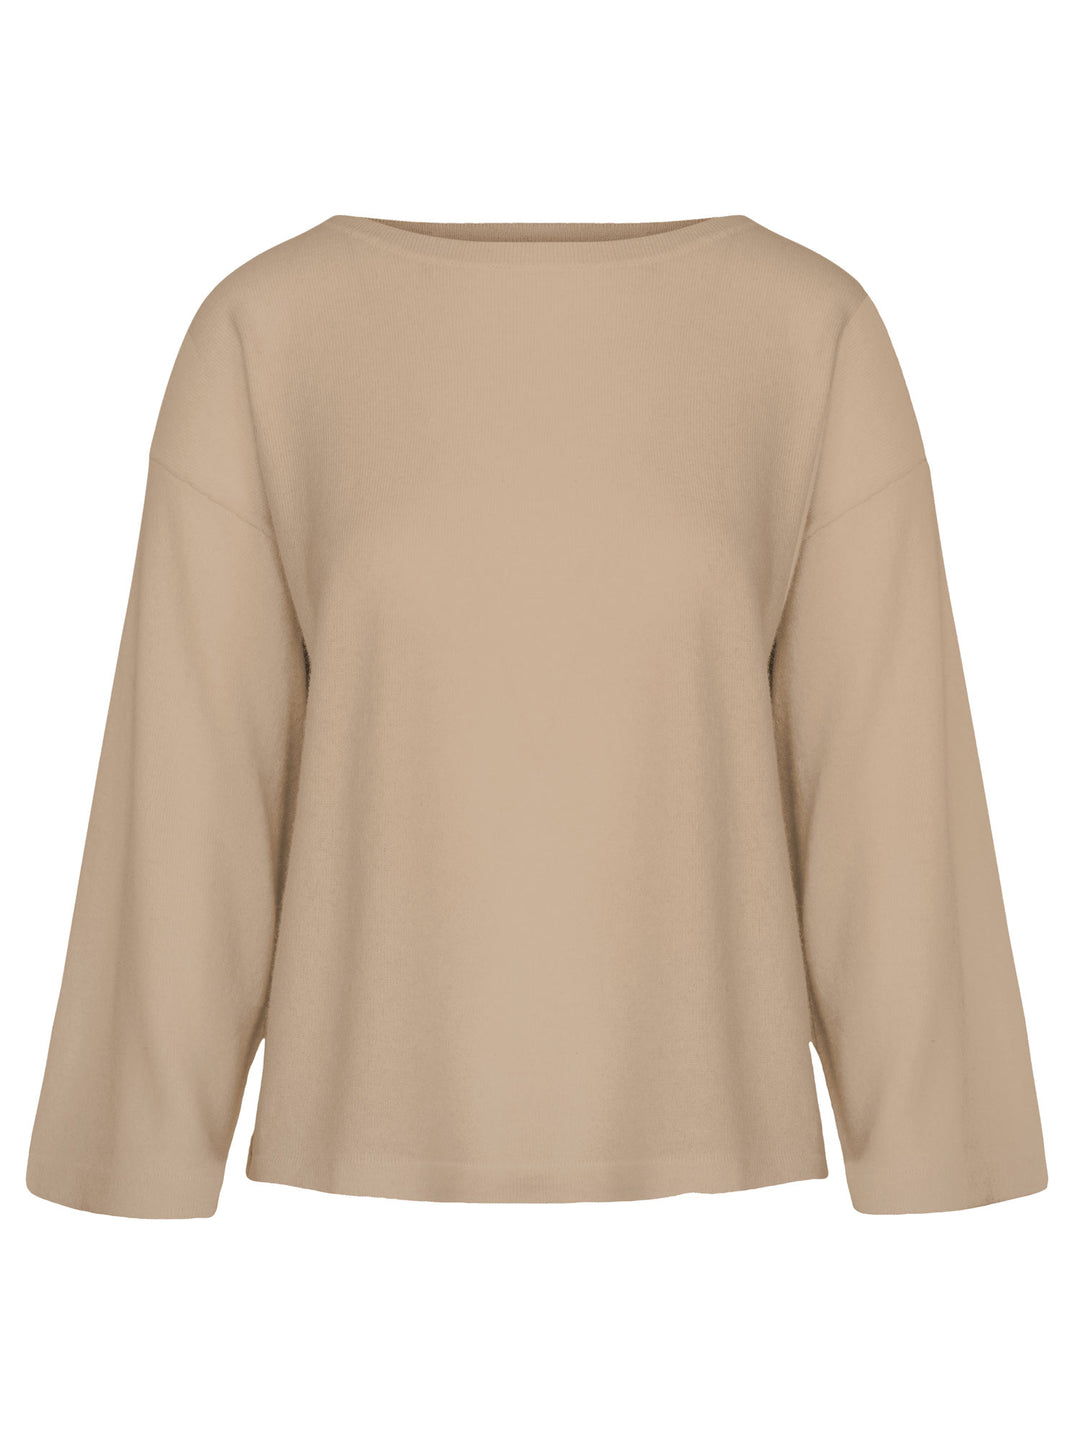 cashmere sweater, Flash, in 100% pure cashmere, by Kashmina, sand color